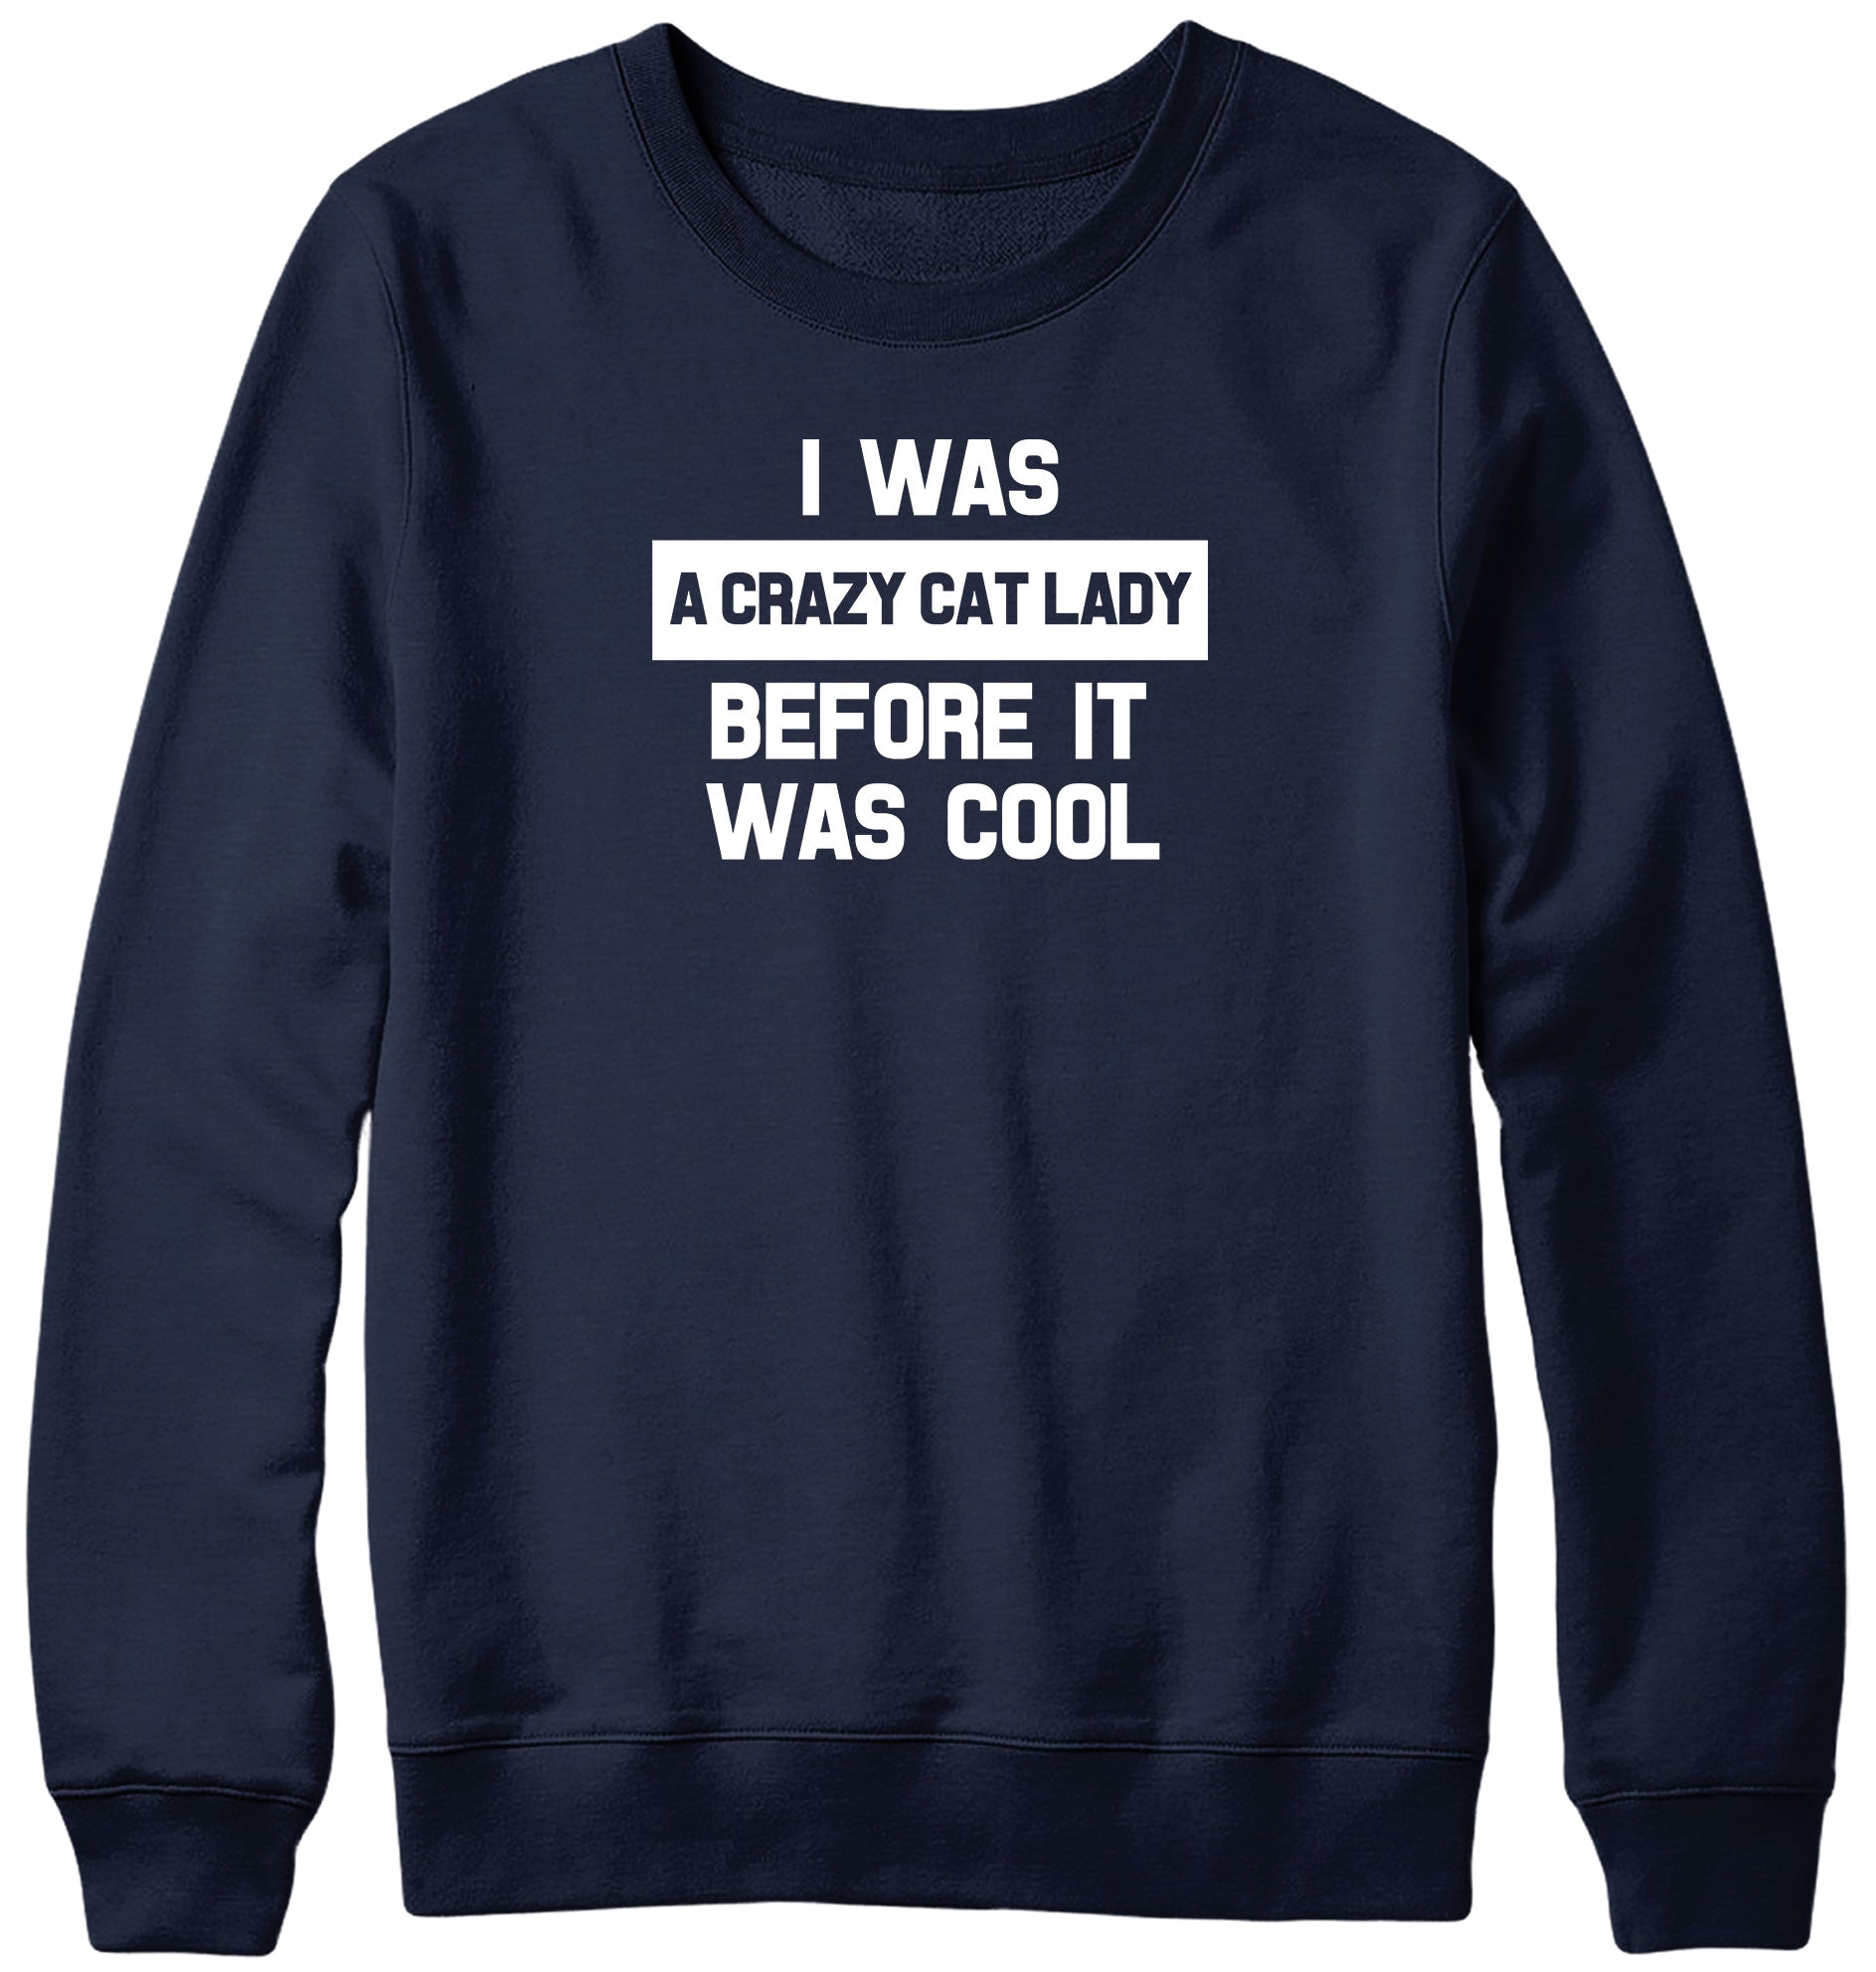 I WAS A CRAZY CAT LADY BEFORE IT WAS COOL WOMENS LADIES MENS UNISEX SWEATSHIRT